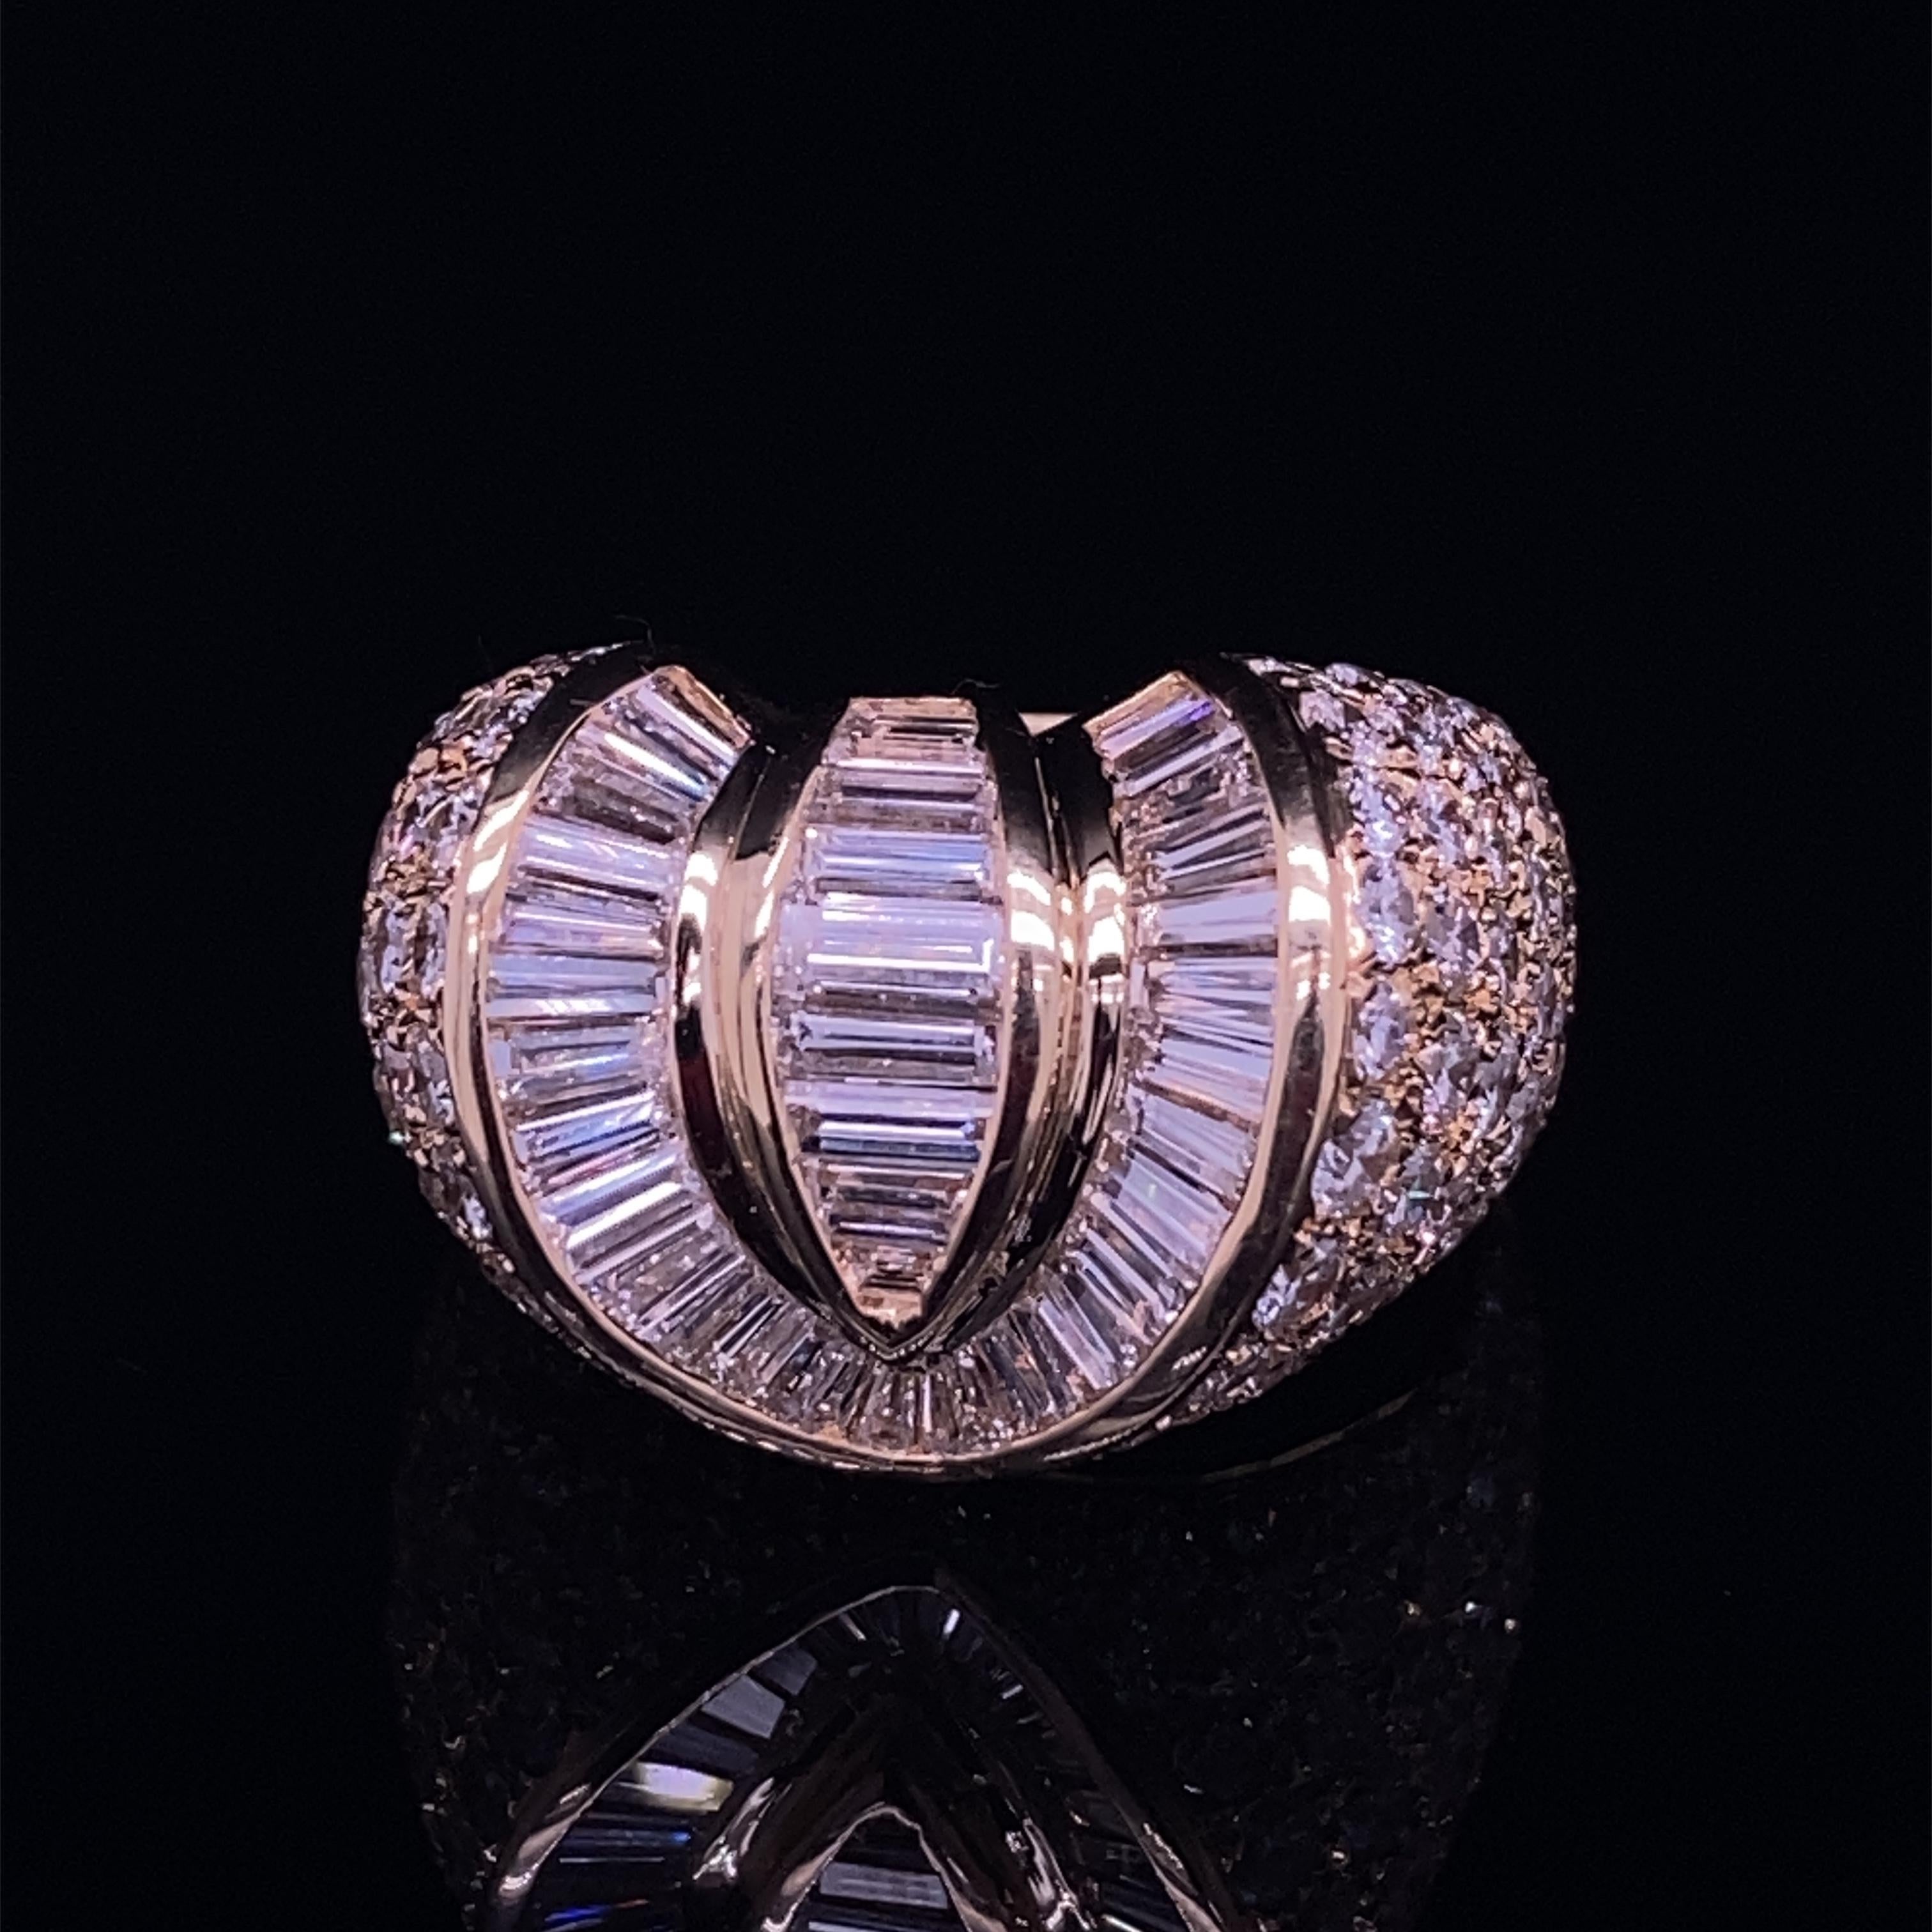 Circa 1980s 7.0 Ctw Diamond Statement Ring in 18K Gold For Sale 2